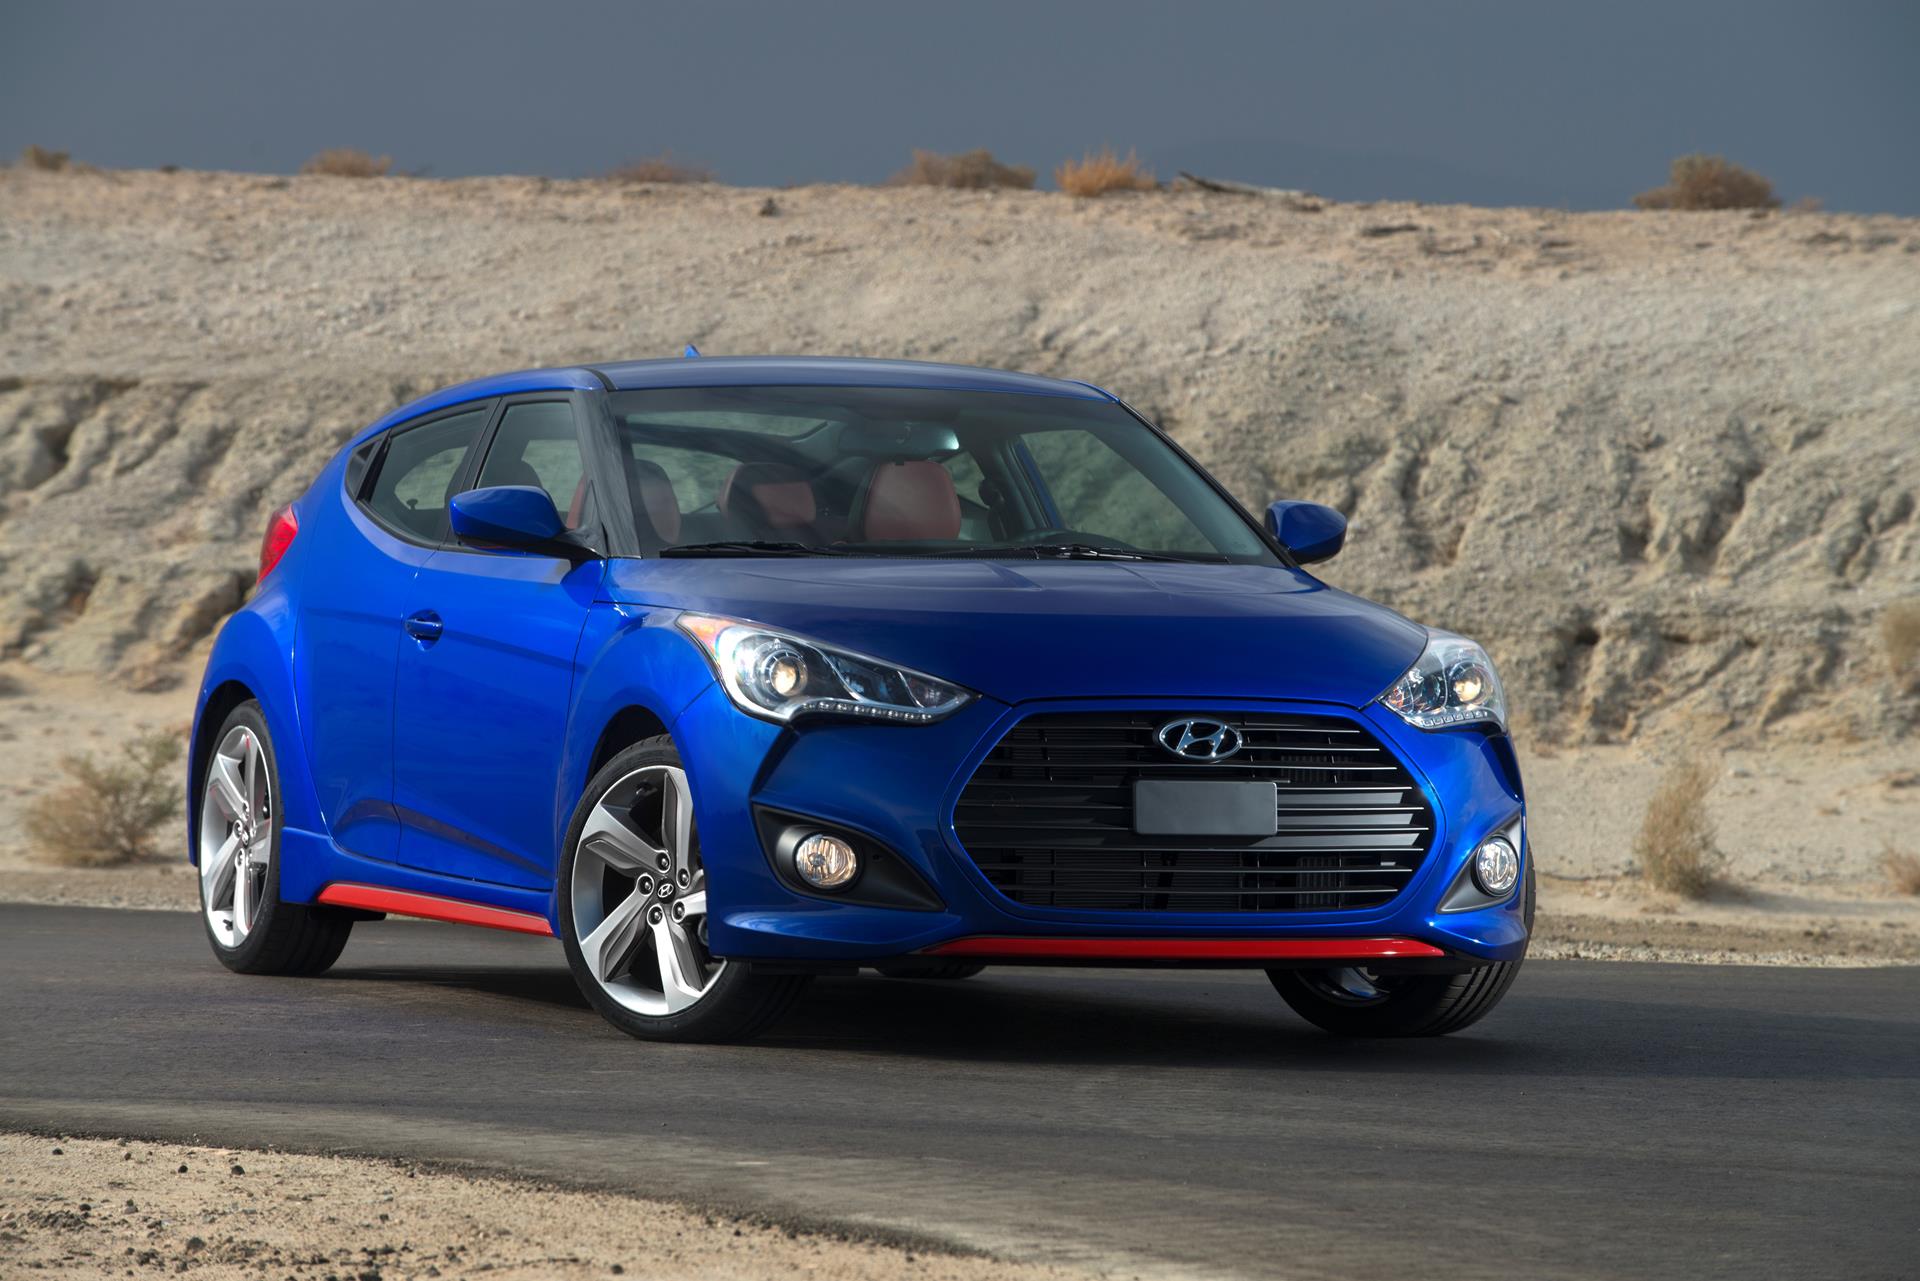 2015 Hyundai Veloster Turbo R Spec News And Information